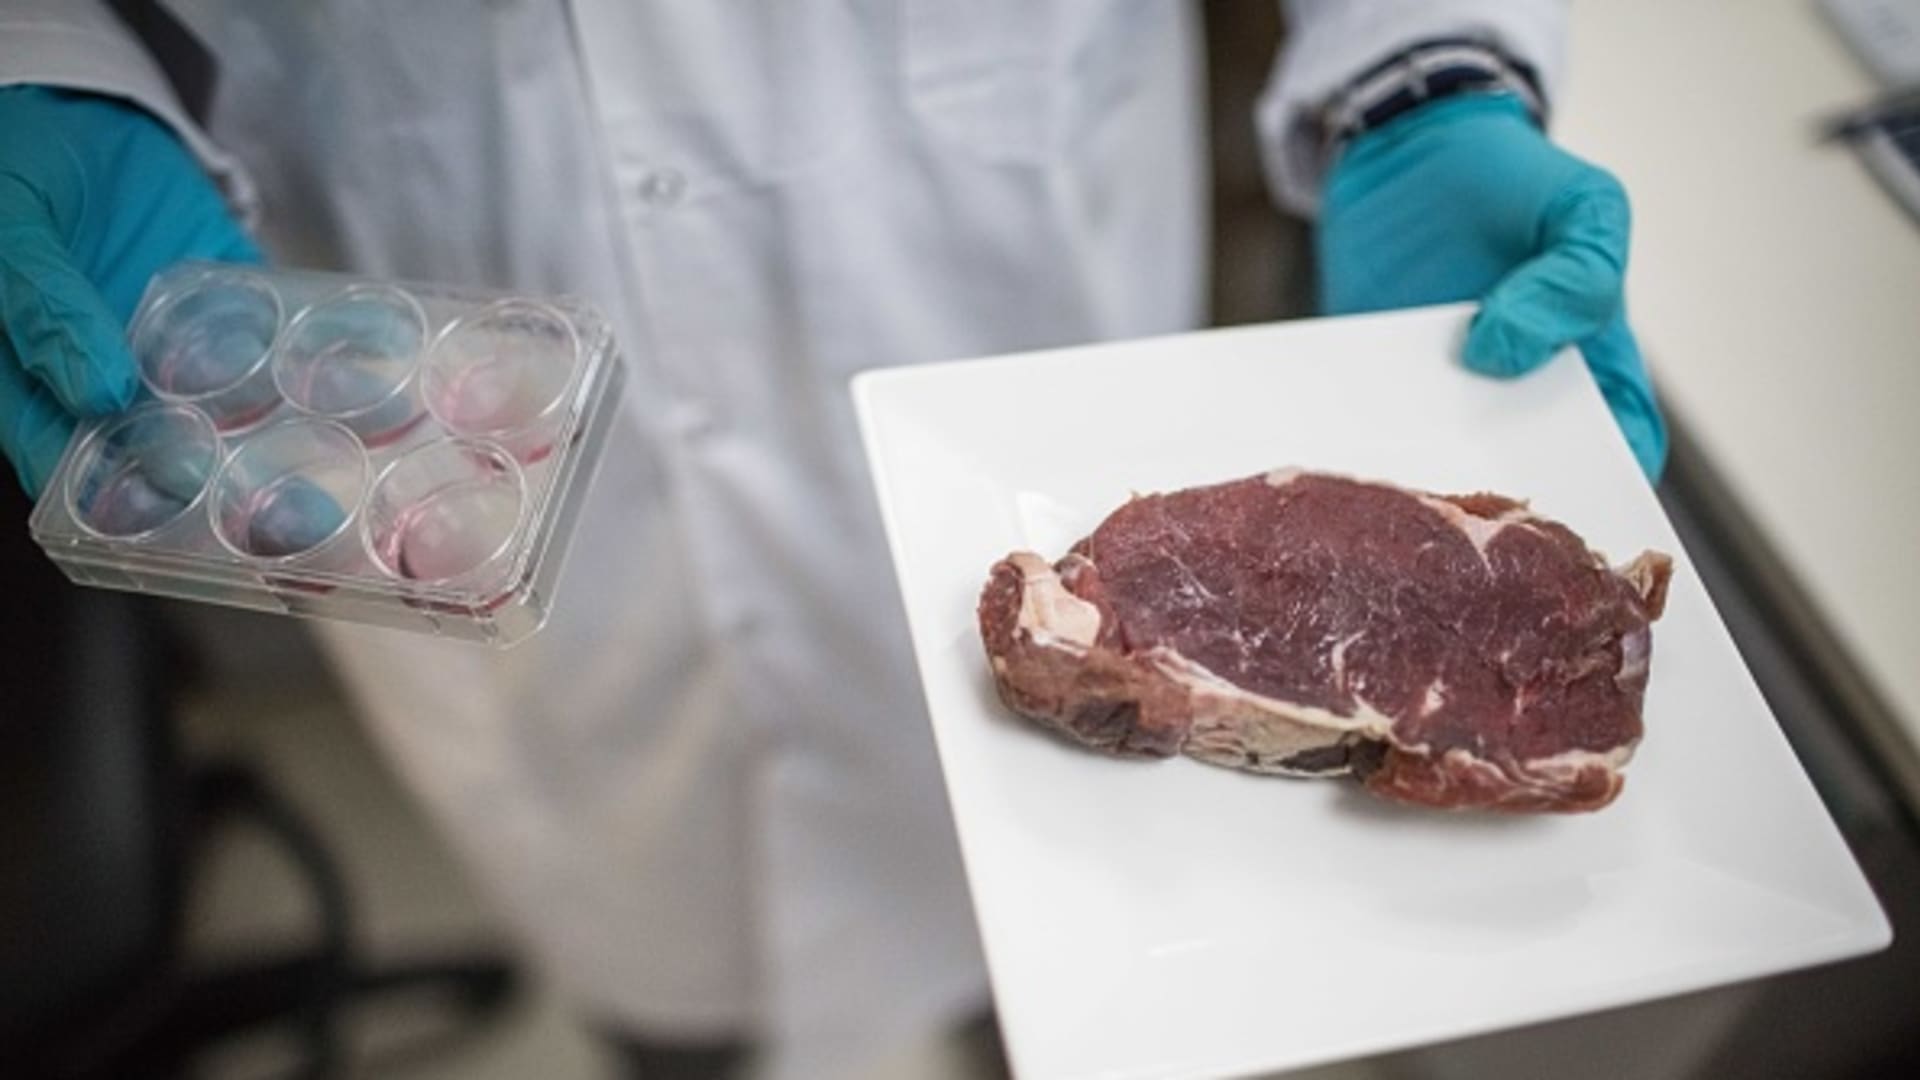 Investors are betting on meat grown in a laboratory as interest in plant-based foods declines